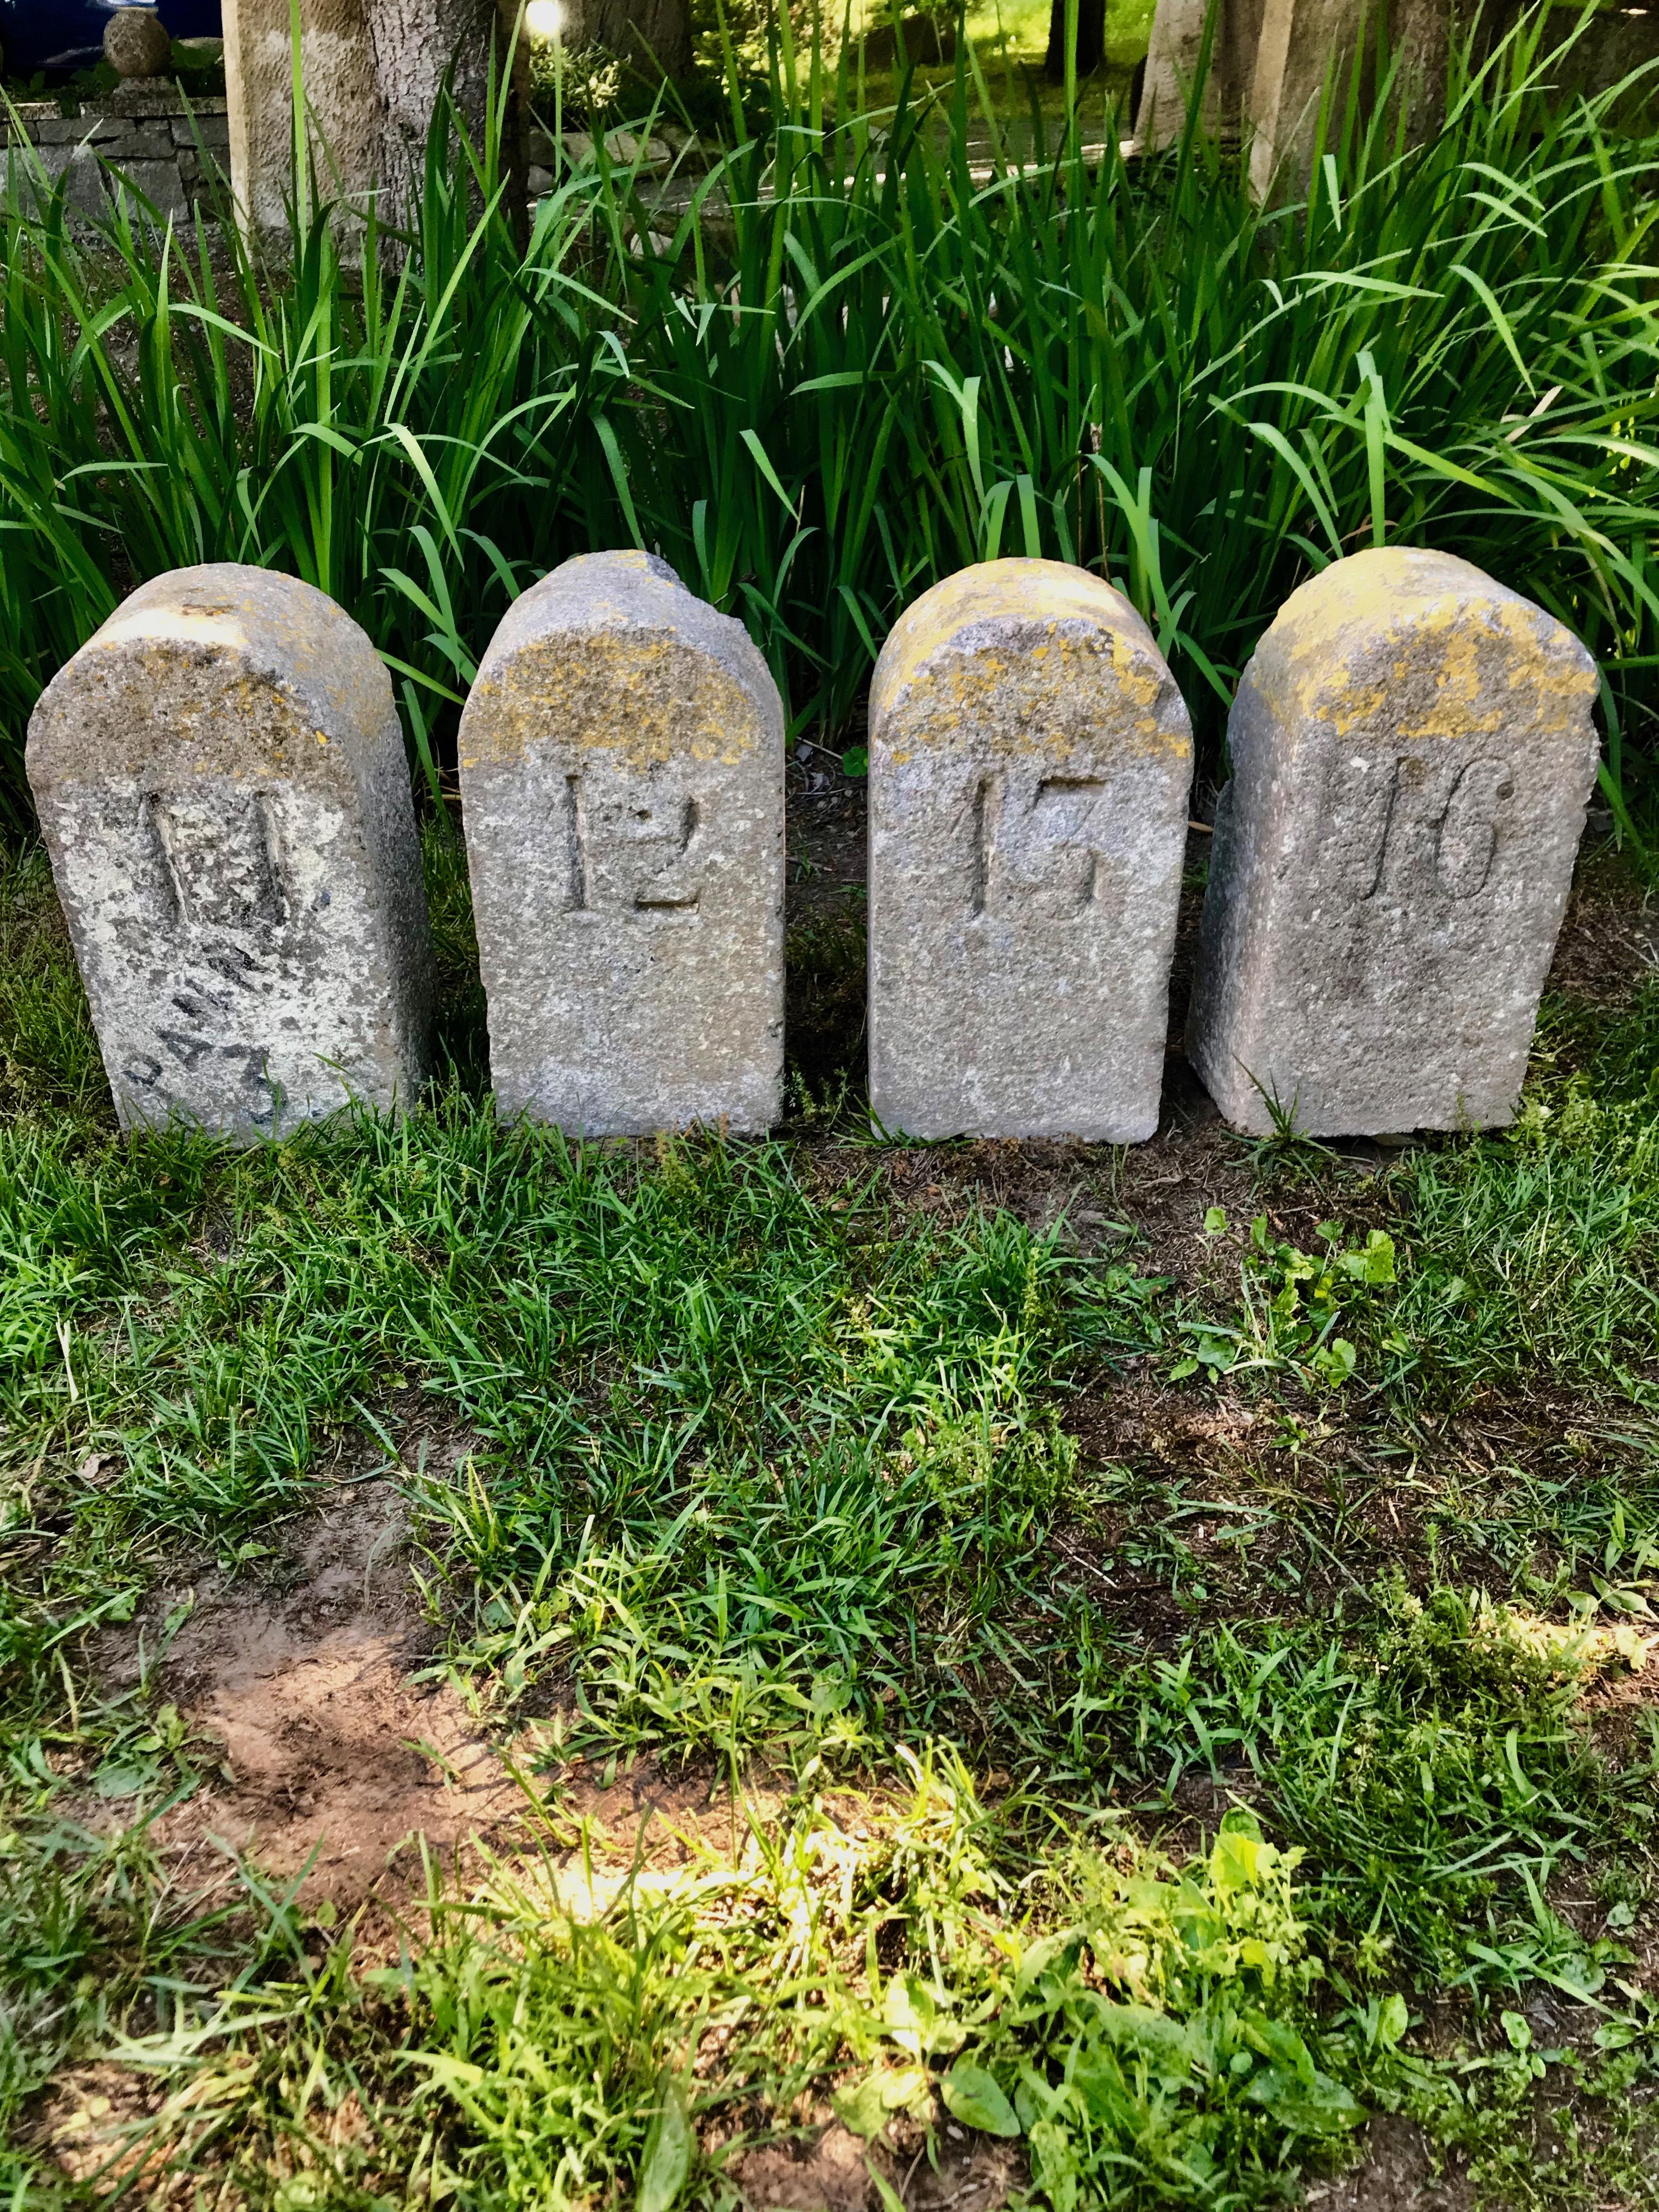 We love historical architectural pieces and these four carved stone distance markers came from outside the city of Nancy in France. Each features remnants of old yellow and white paint and they have large carved numbers in them: Numbers 11, 12, 13